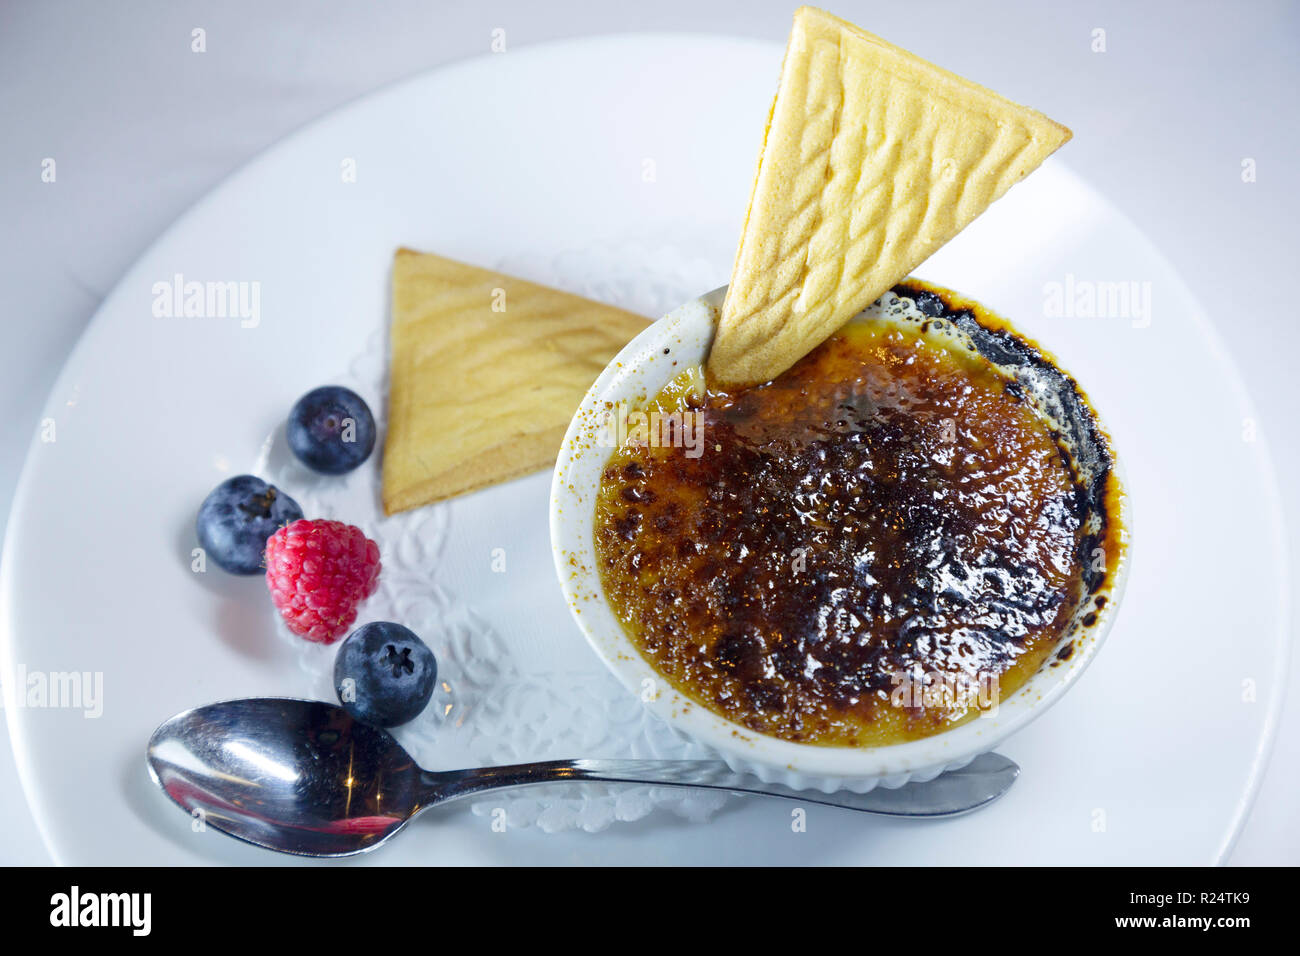 Creme Brulee served with wafers and seasonal fruit in Quebec, Canada. The dessert has a hard glaze. Stock Photo